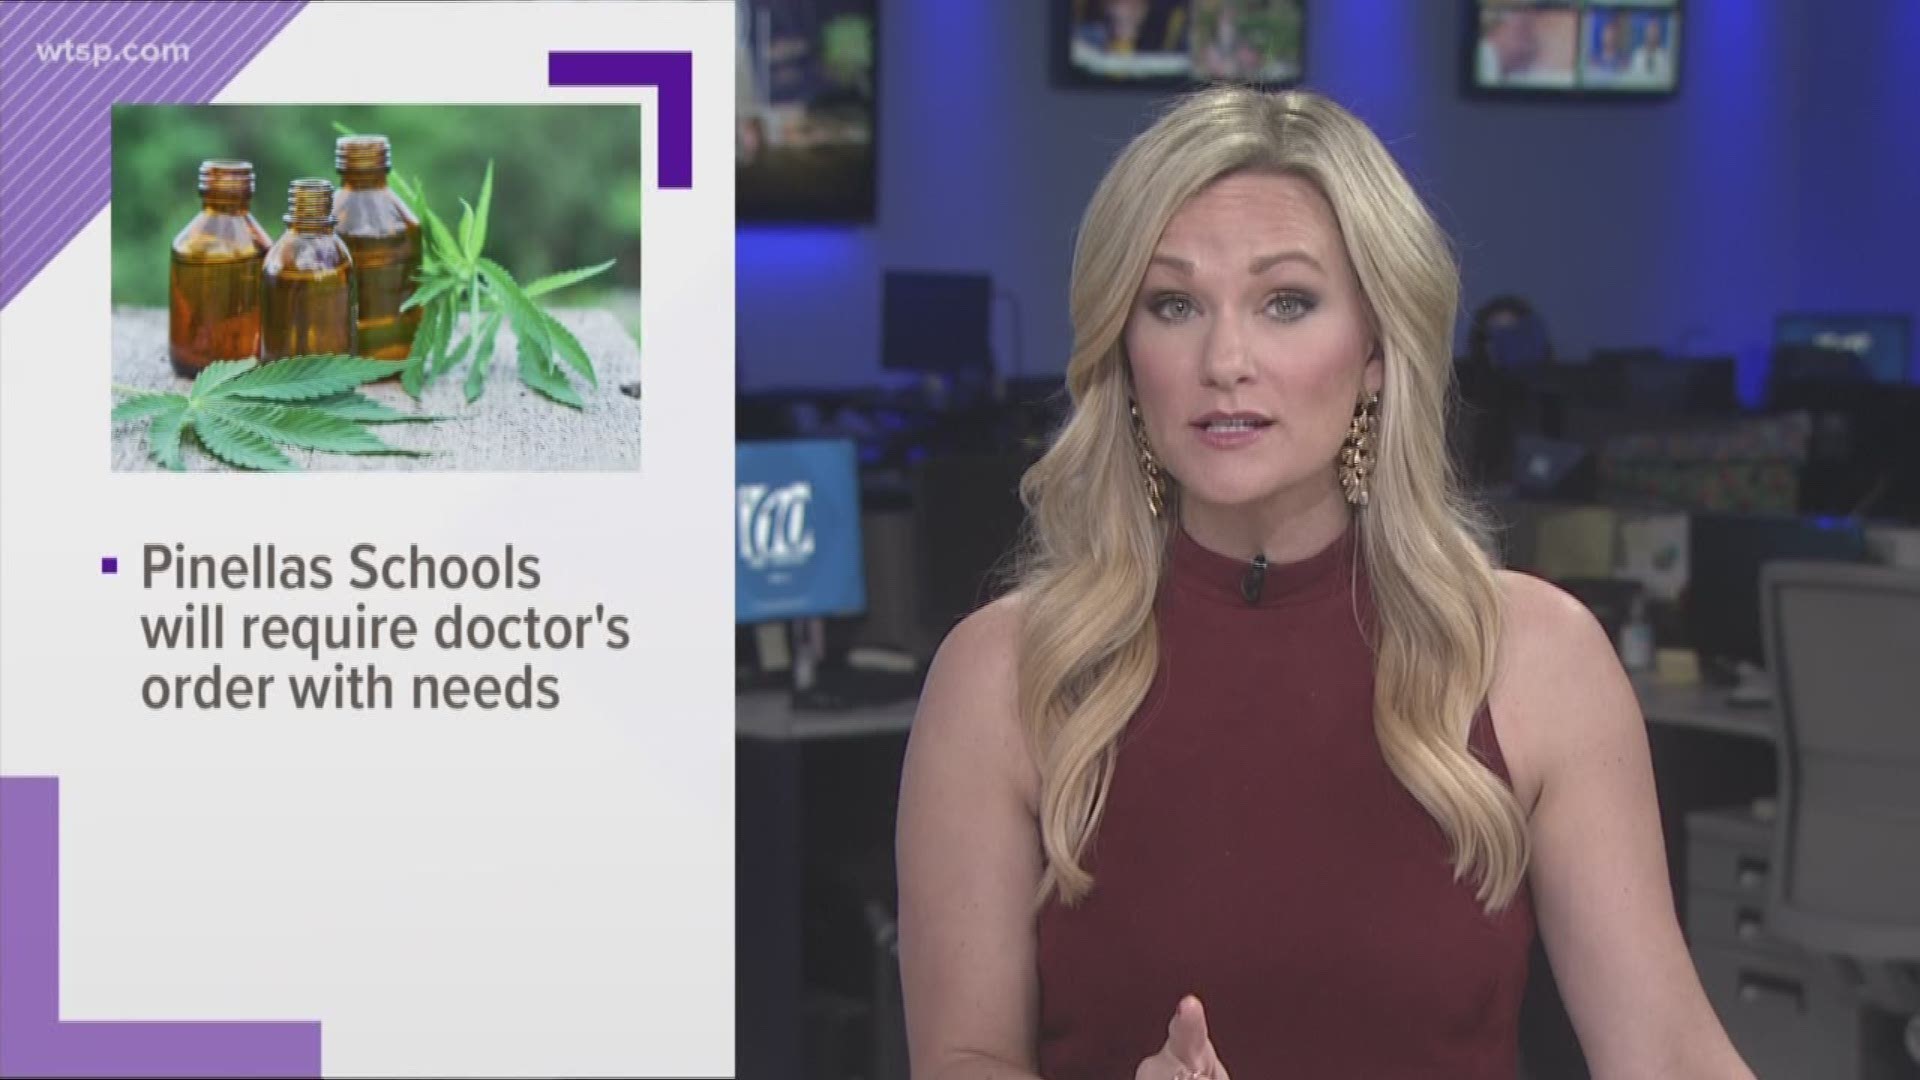 The Pinellas County School Board on Tuesday formally approved its policy on medical marijuana on school grounds.